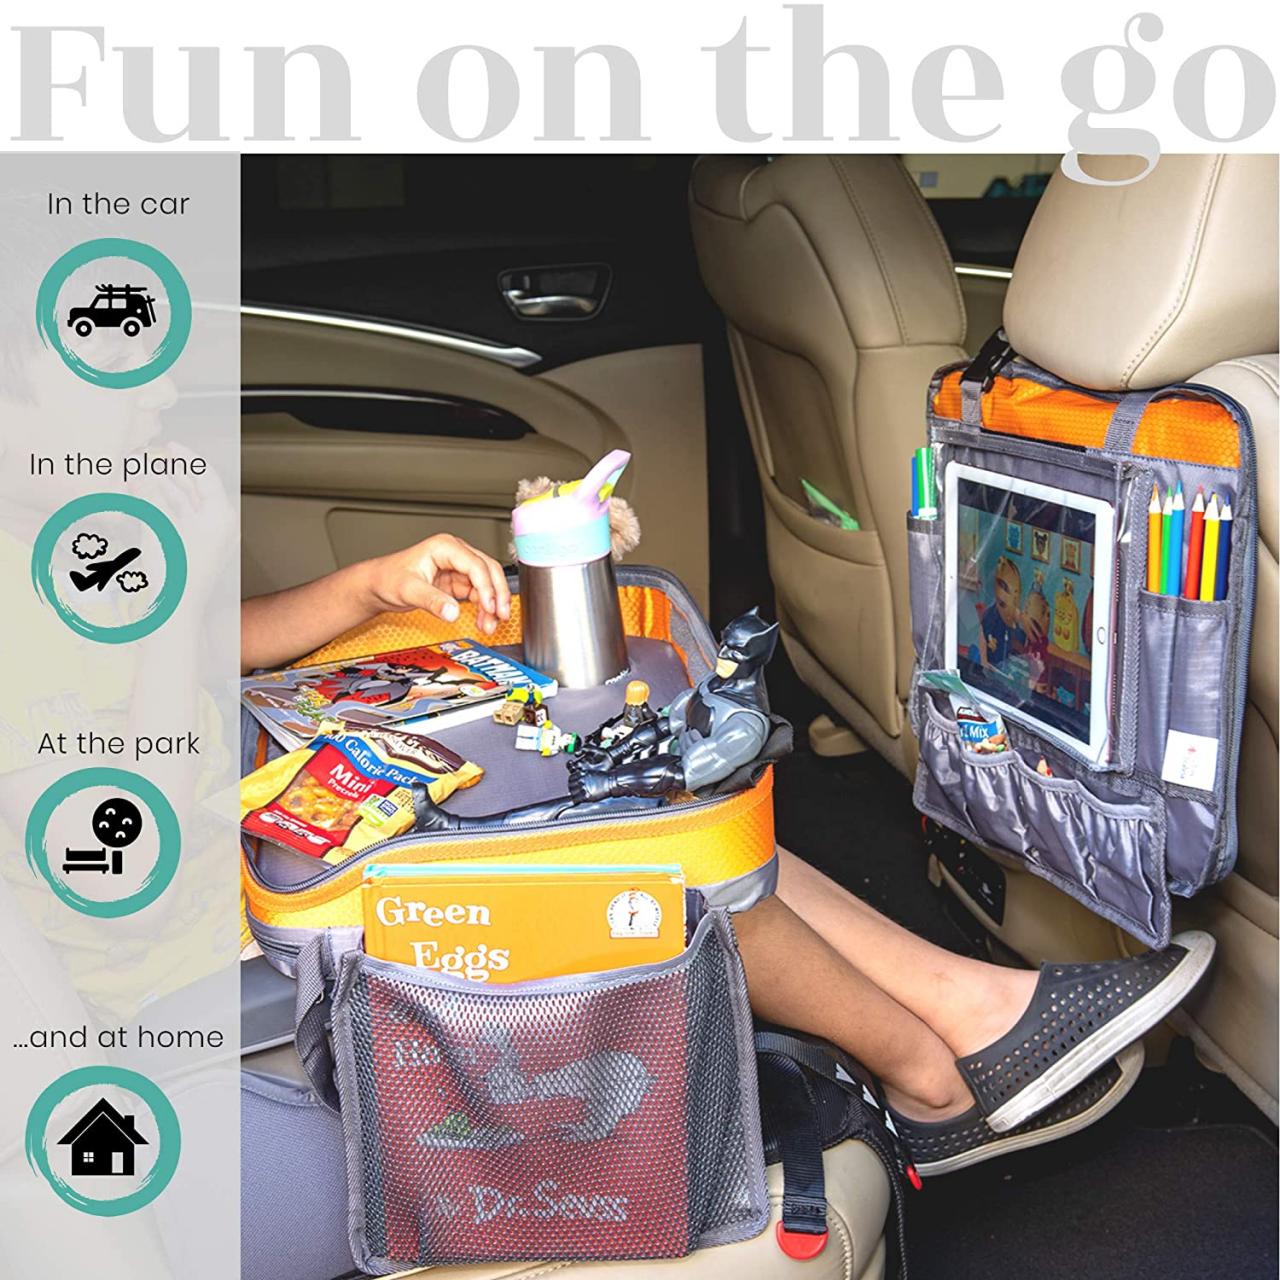 Buy Kids Travel Tray Car Seat Tray, Toddler Travel Tray Detaches Into  Tablet Holder and Snack Play Travel Tray Table Online in Hong Kong.  B07KJGW34D